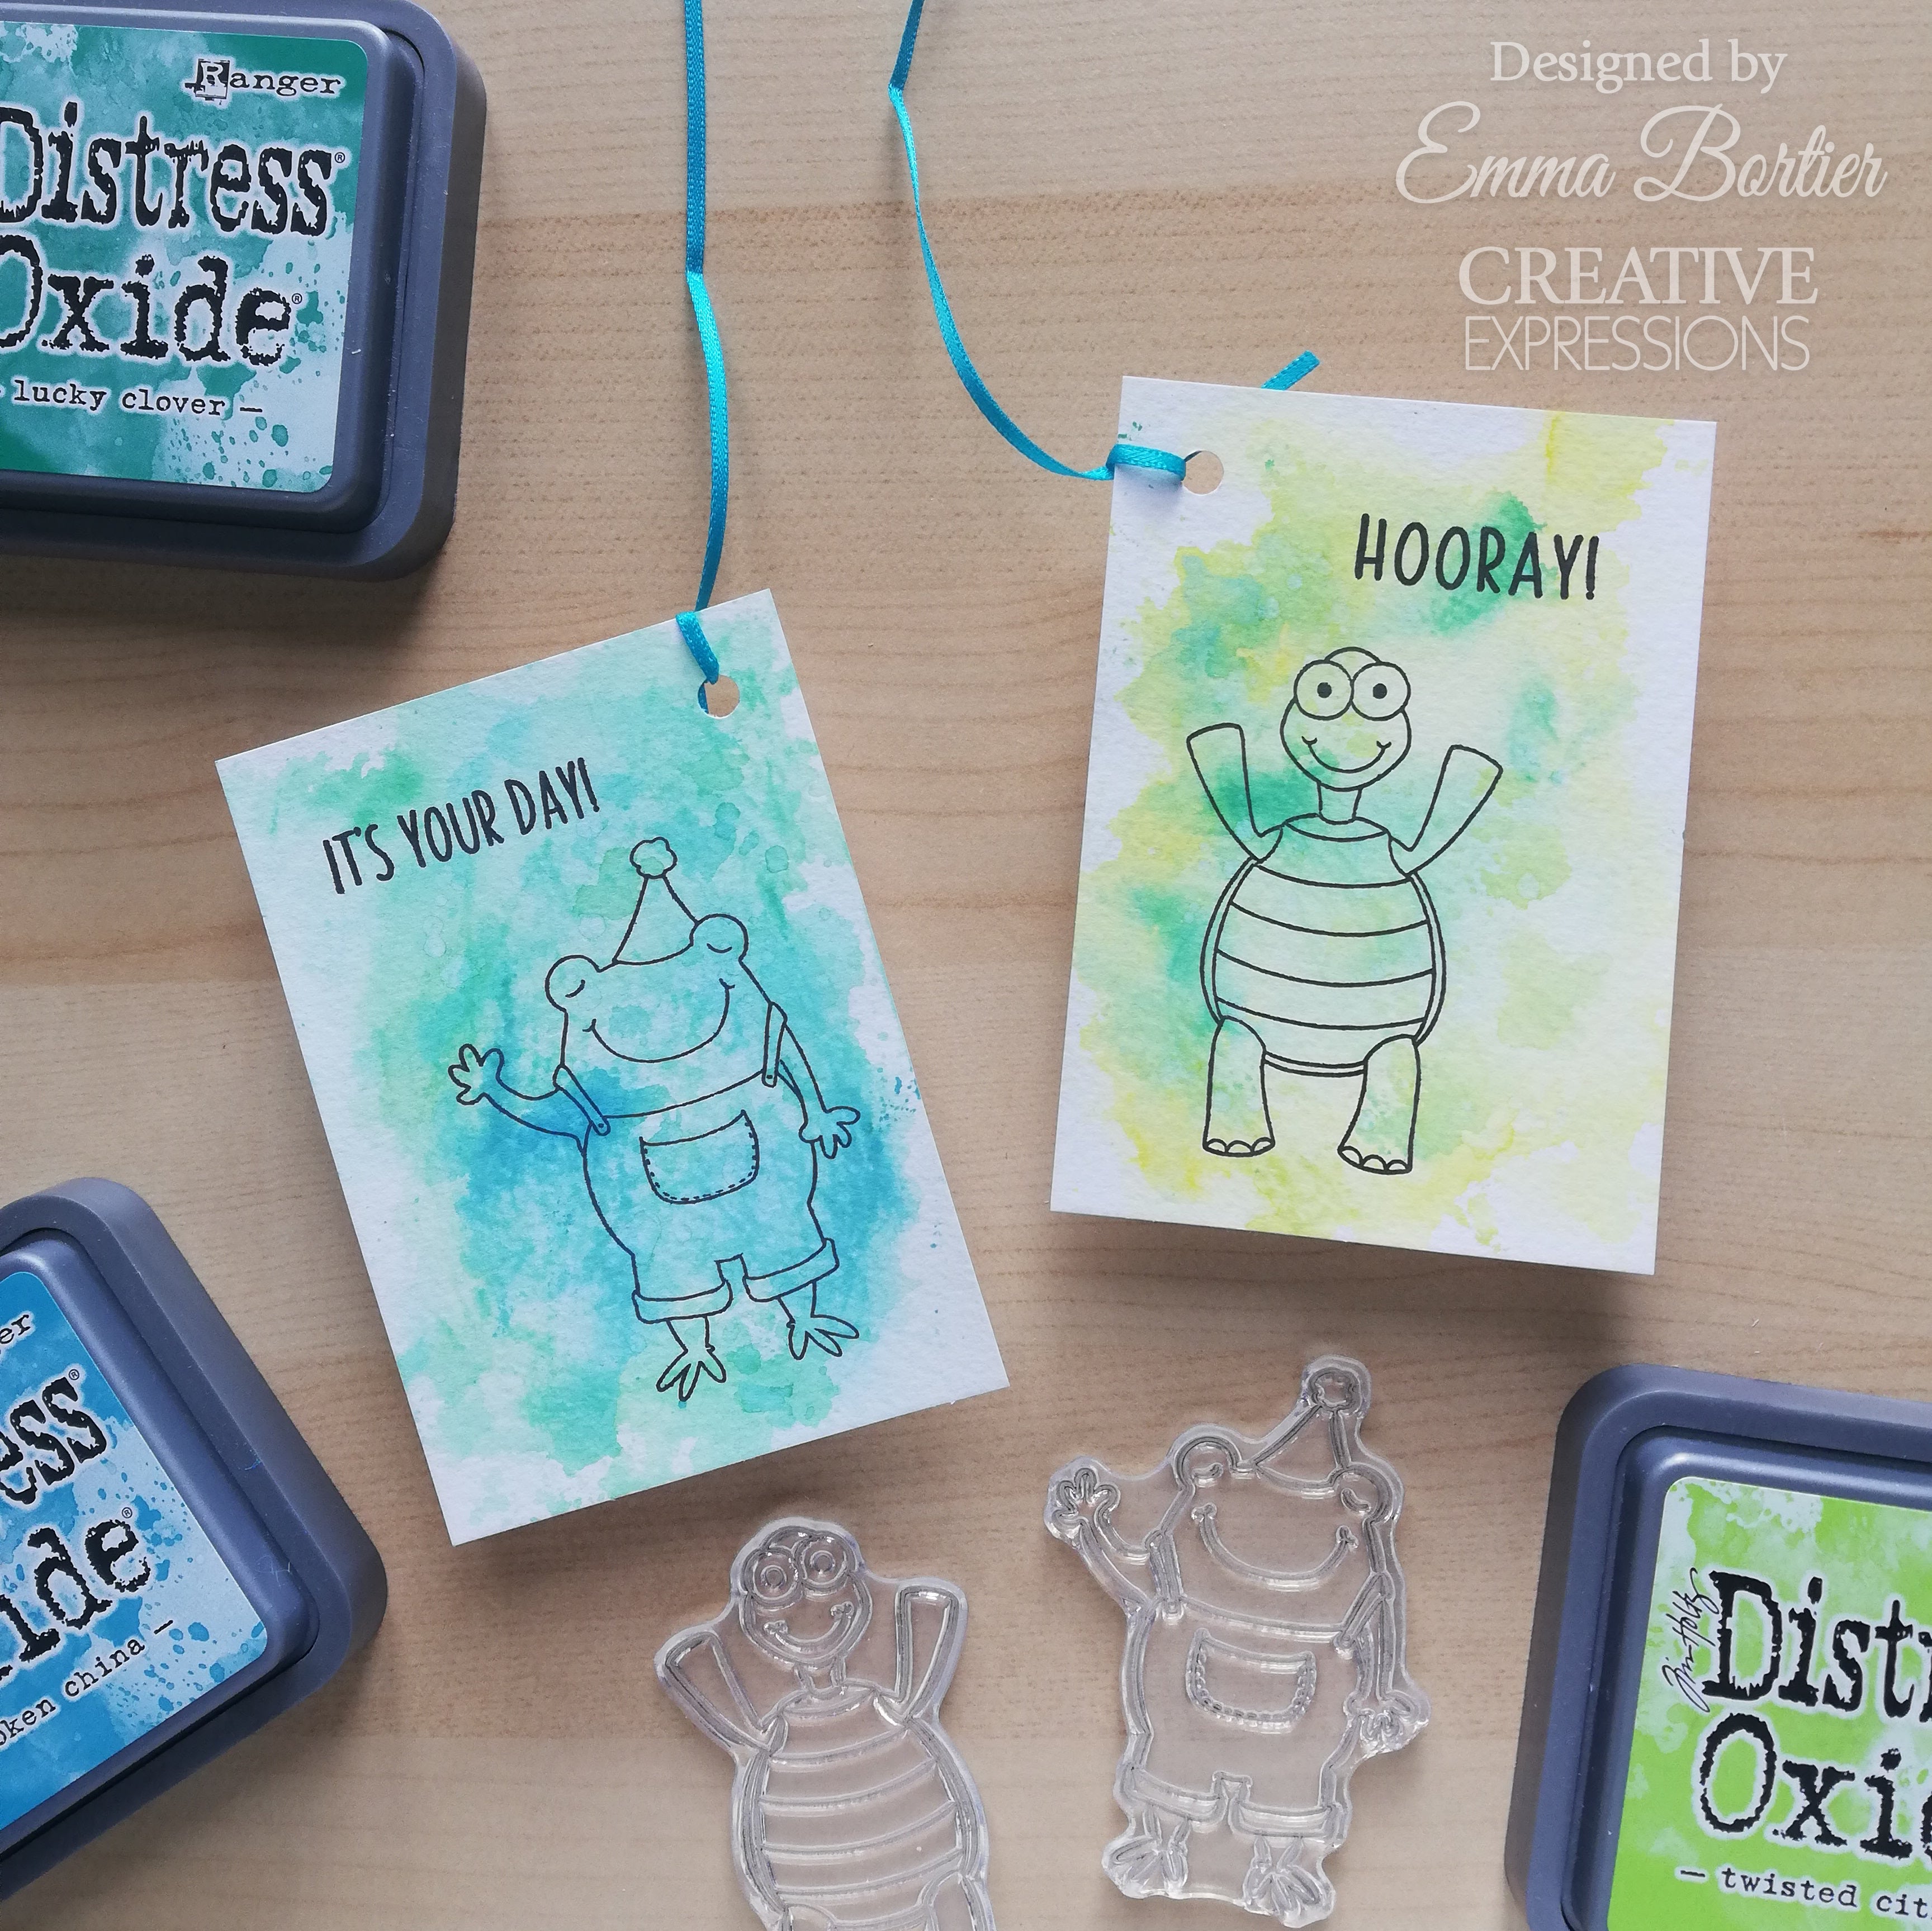 Creative Expressions Jane's Doodles It's Your Day 6 in x 8 in Clear Stamp Set